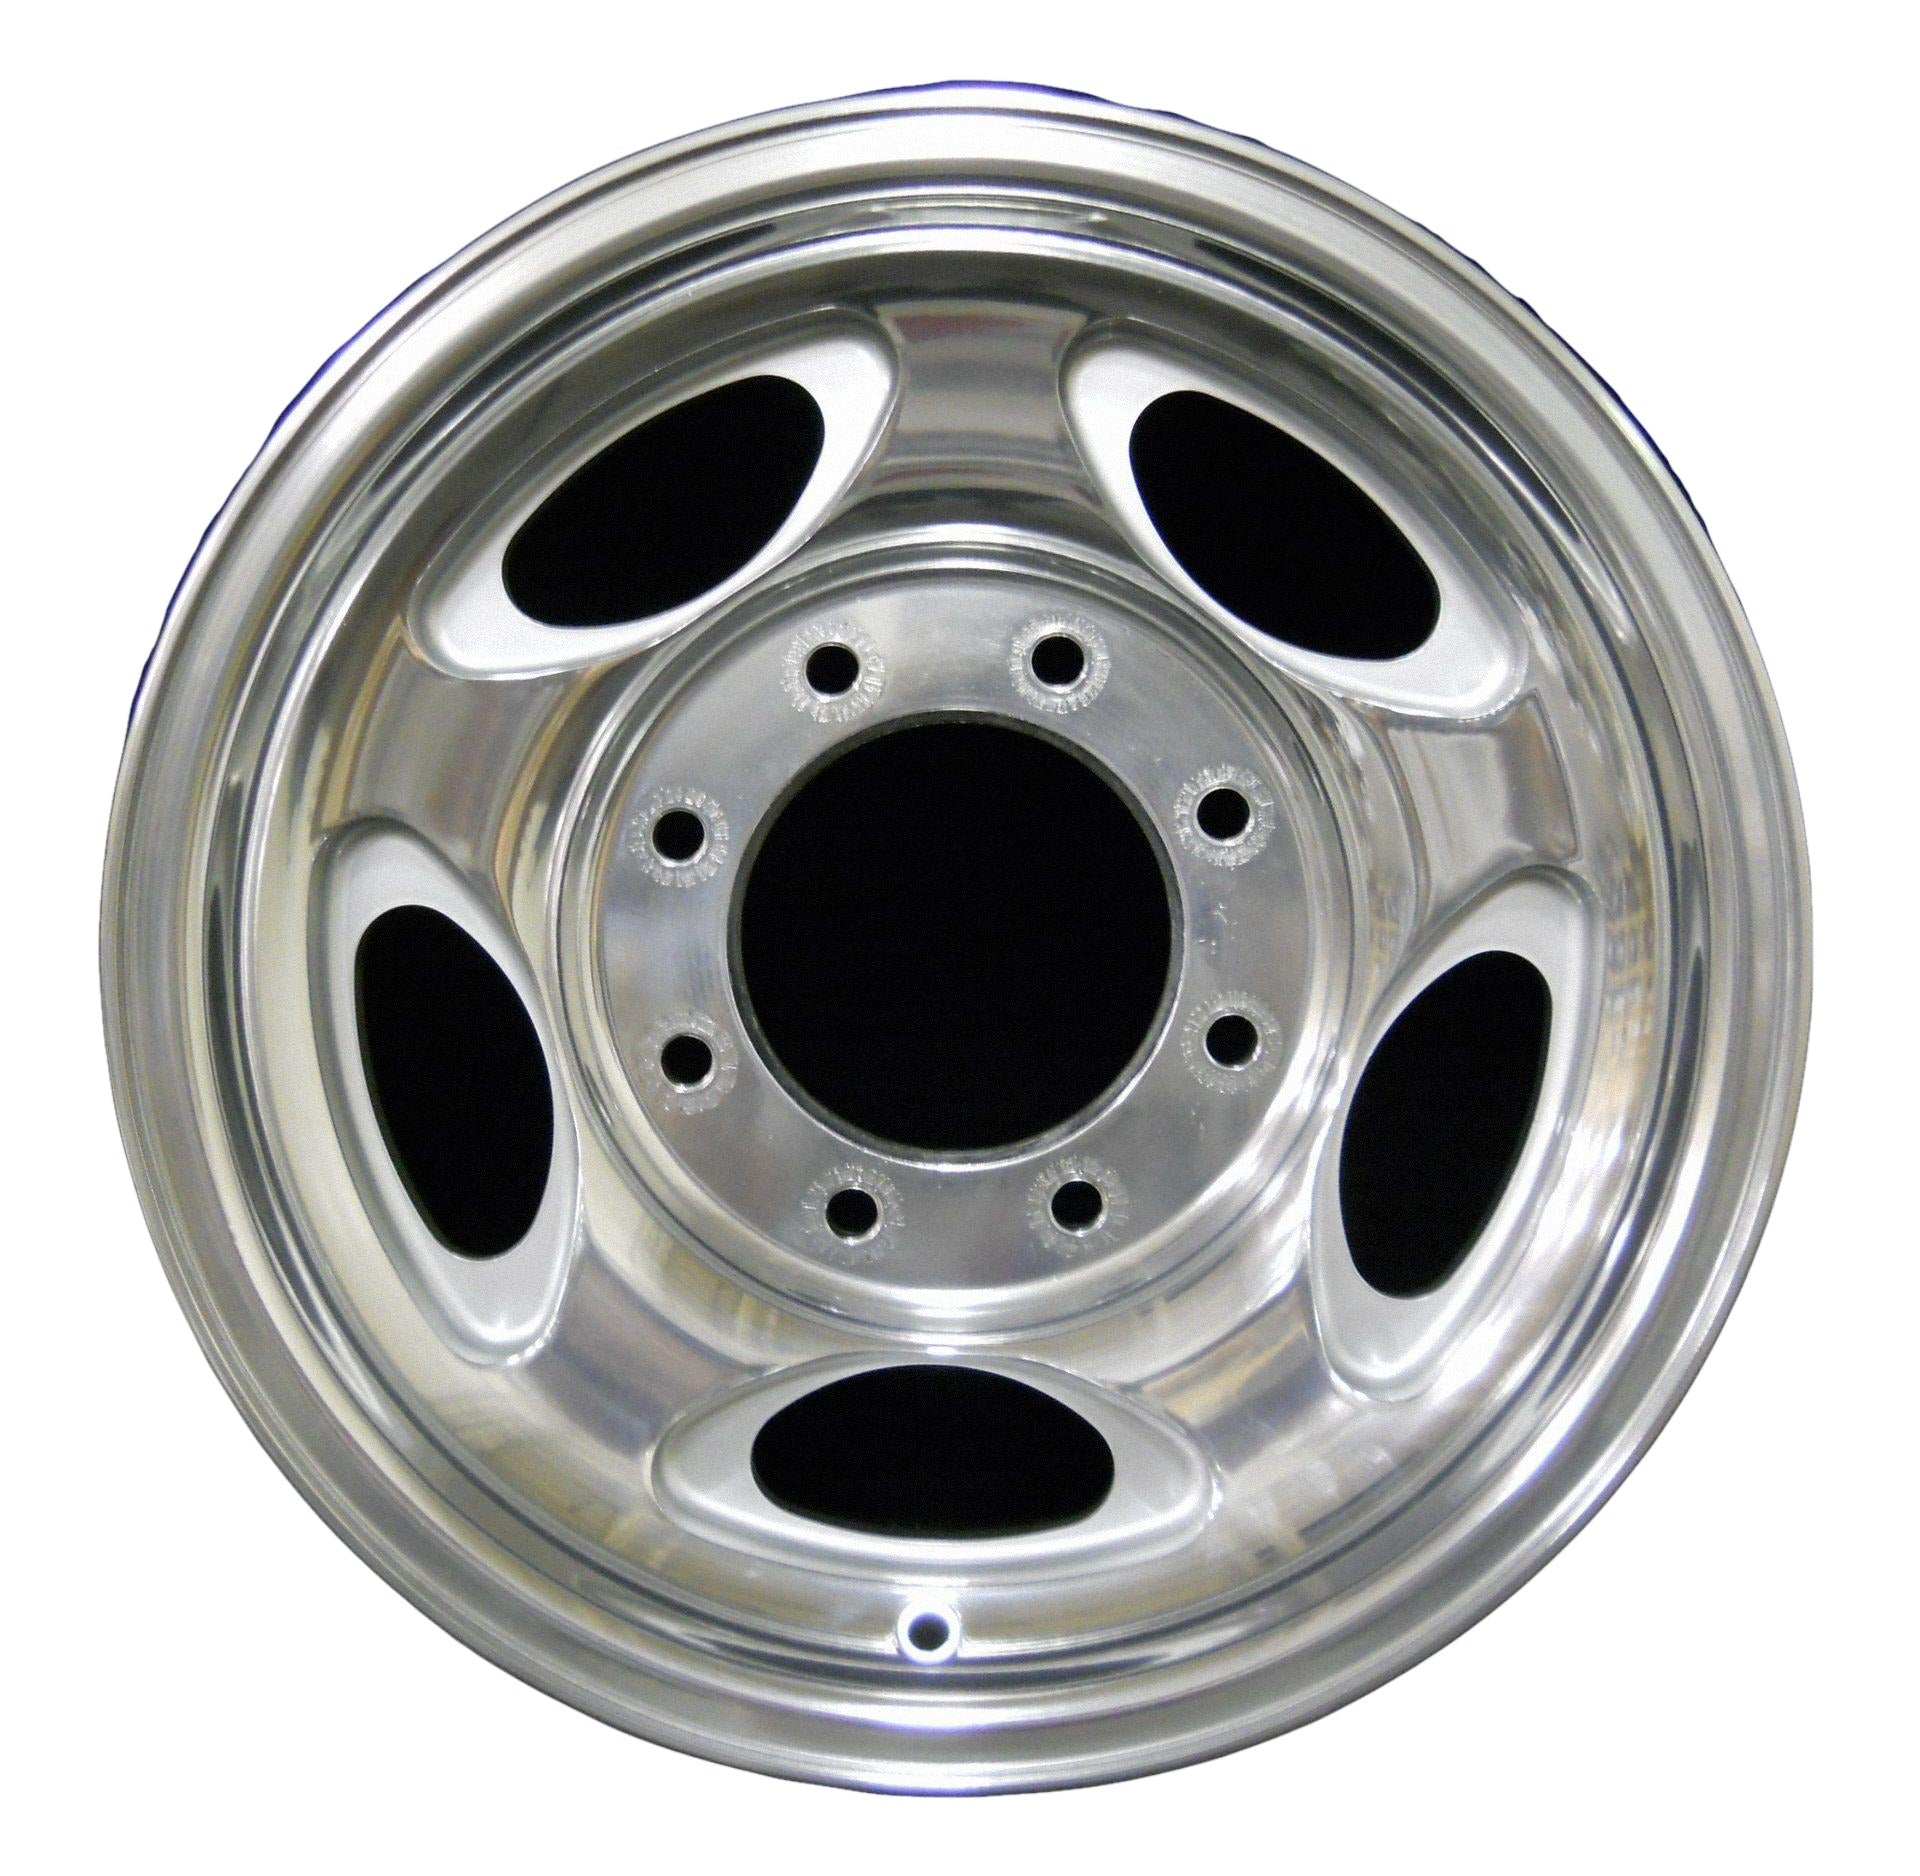 Ford Excursion  2000, 2001, 2002, 2003, 2004 Factory OEM Car Wheel Size 16x7 Alloy WAO.3408B.LS01.TPOL